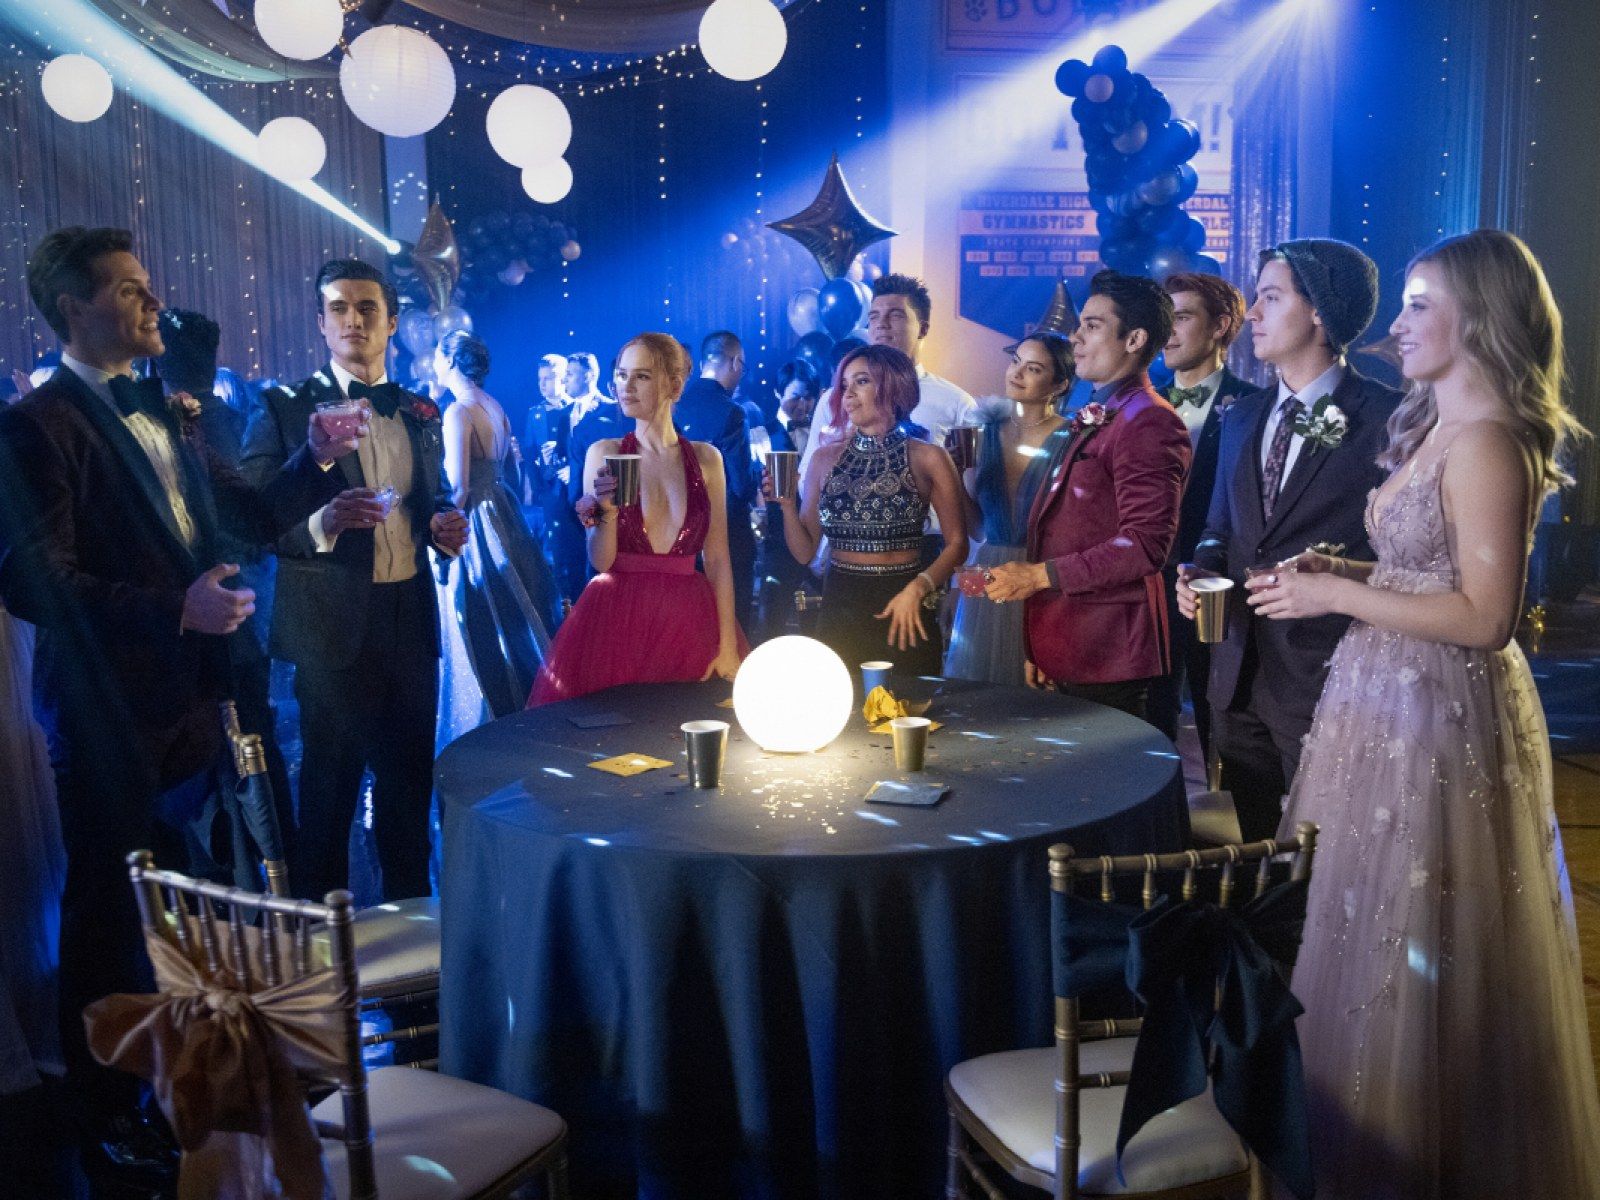 Riverdale' Season 5: How the Prom Episode Sets Up the Time Jump